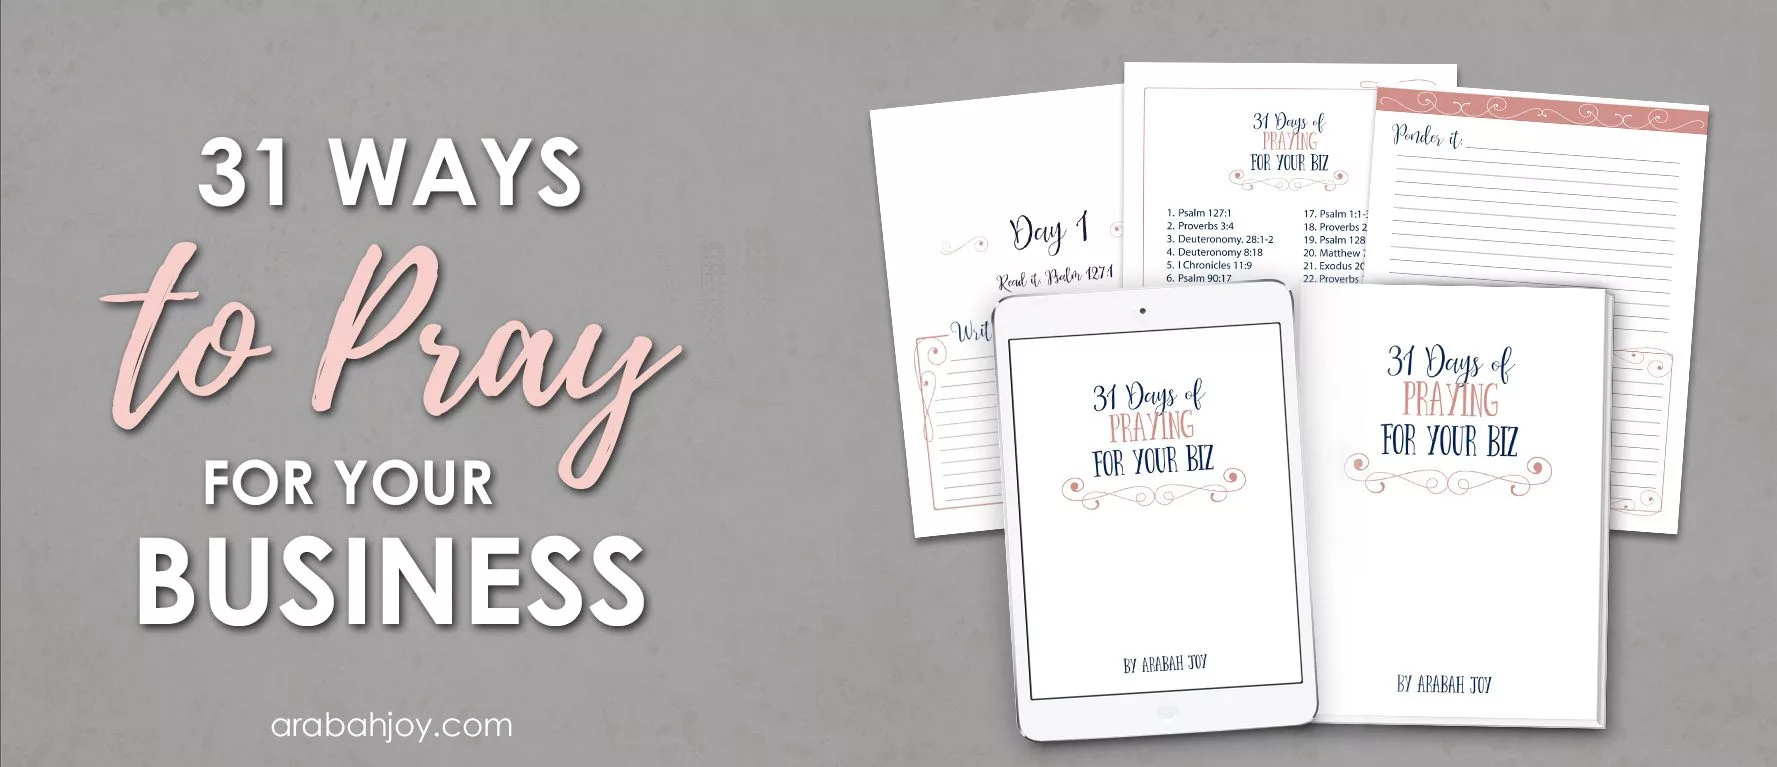 How to Pray for Your Business: Best Scriptures to pray! Join us for this 31 Day Challenge and Pray Scripture for Your Business!